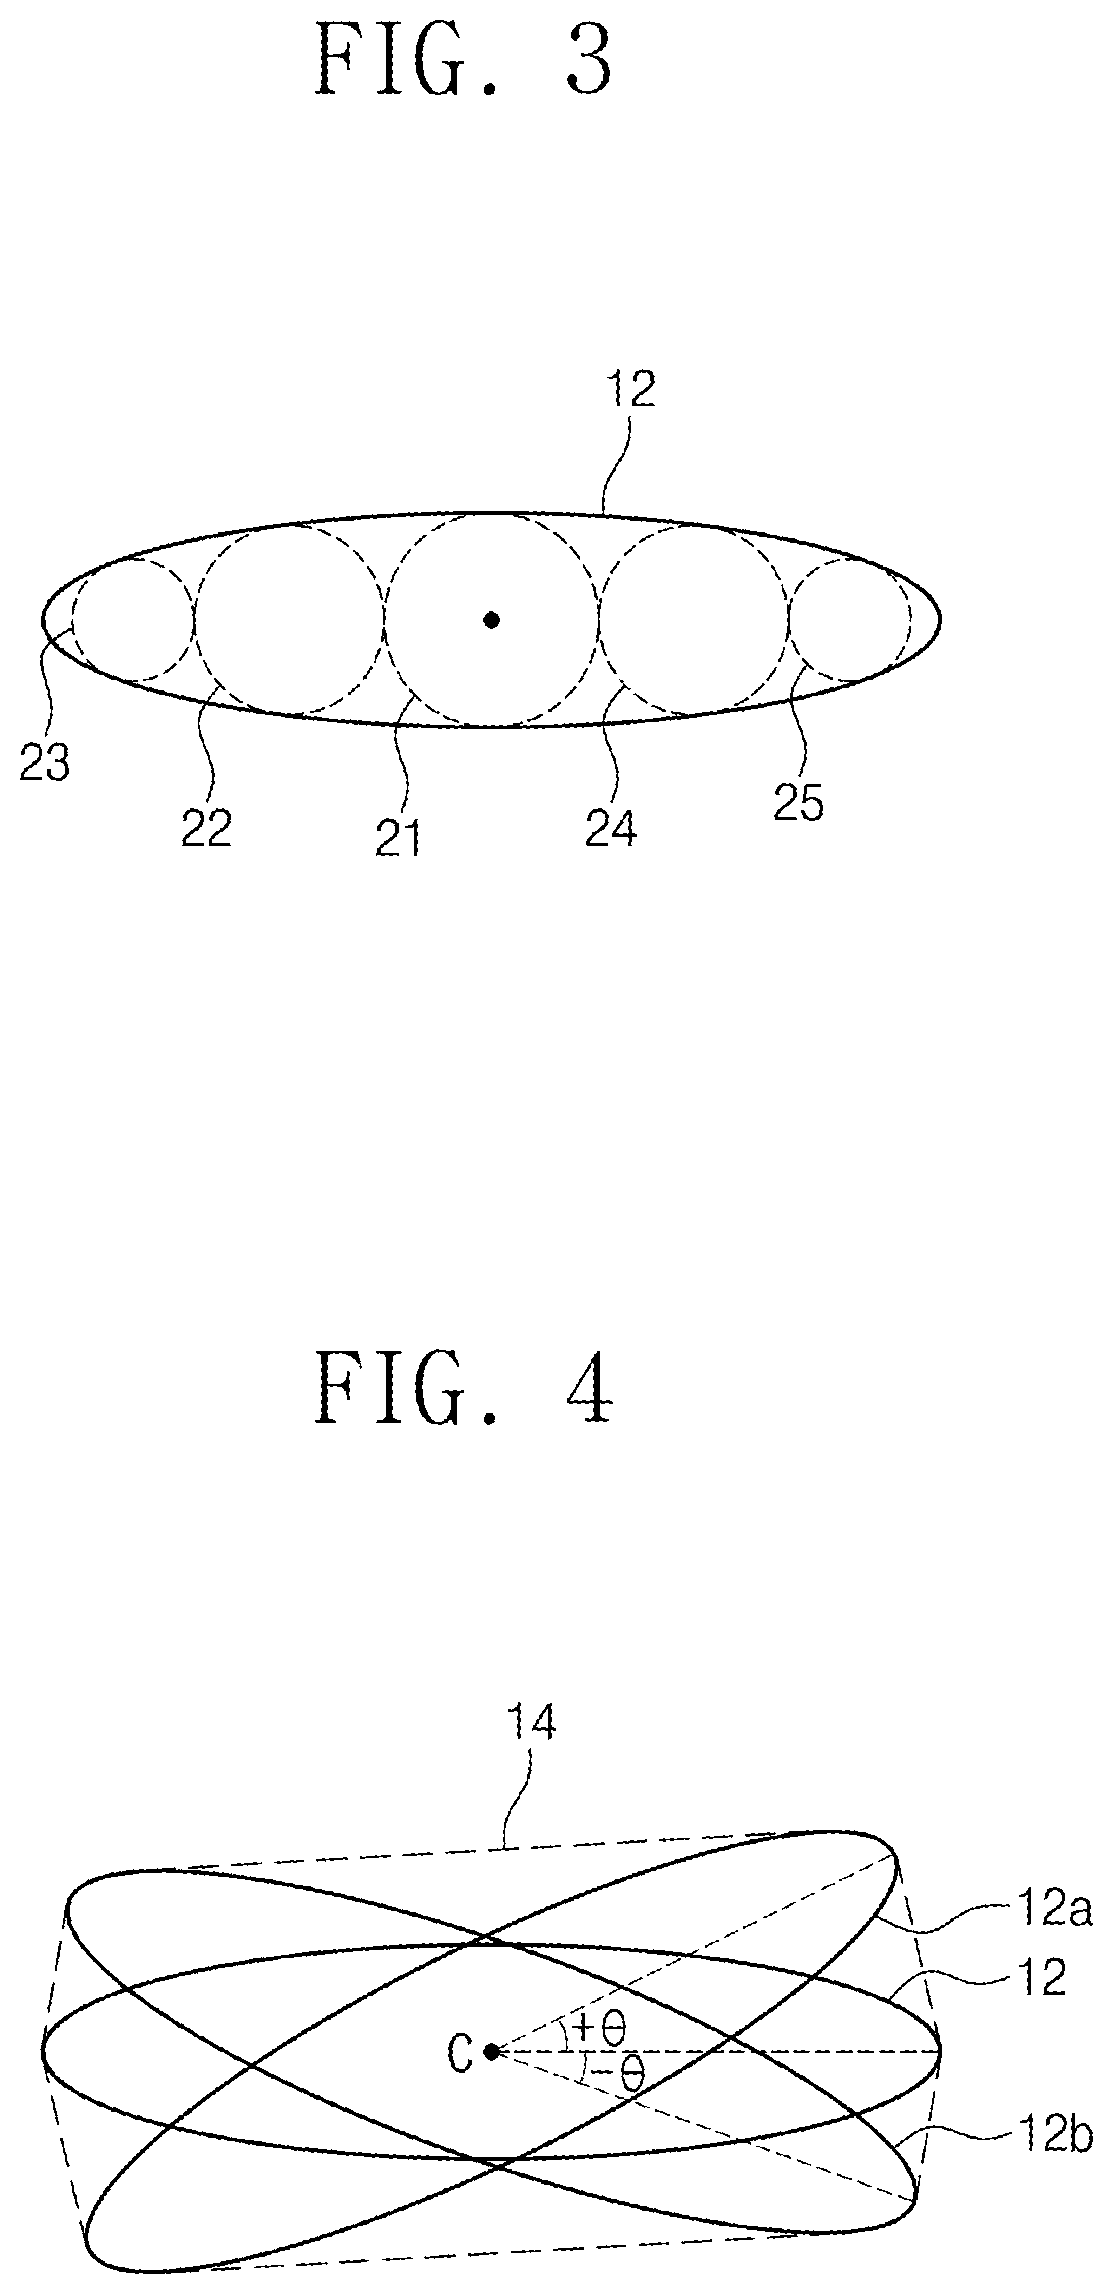 Method for predicting collision and avoiding conflict between multiple moving bodies